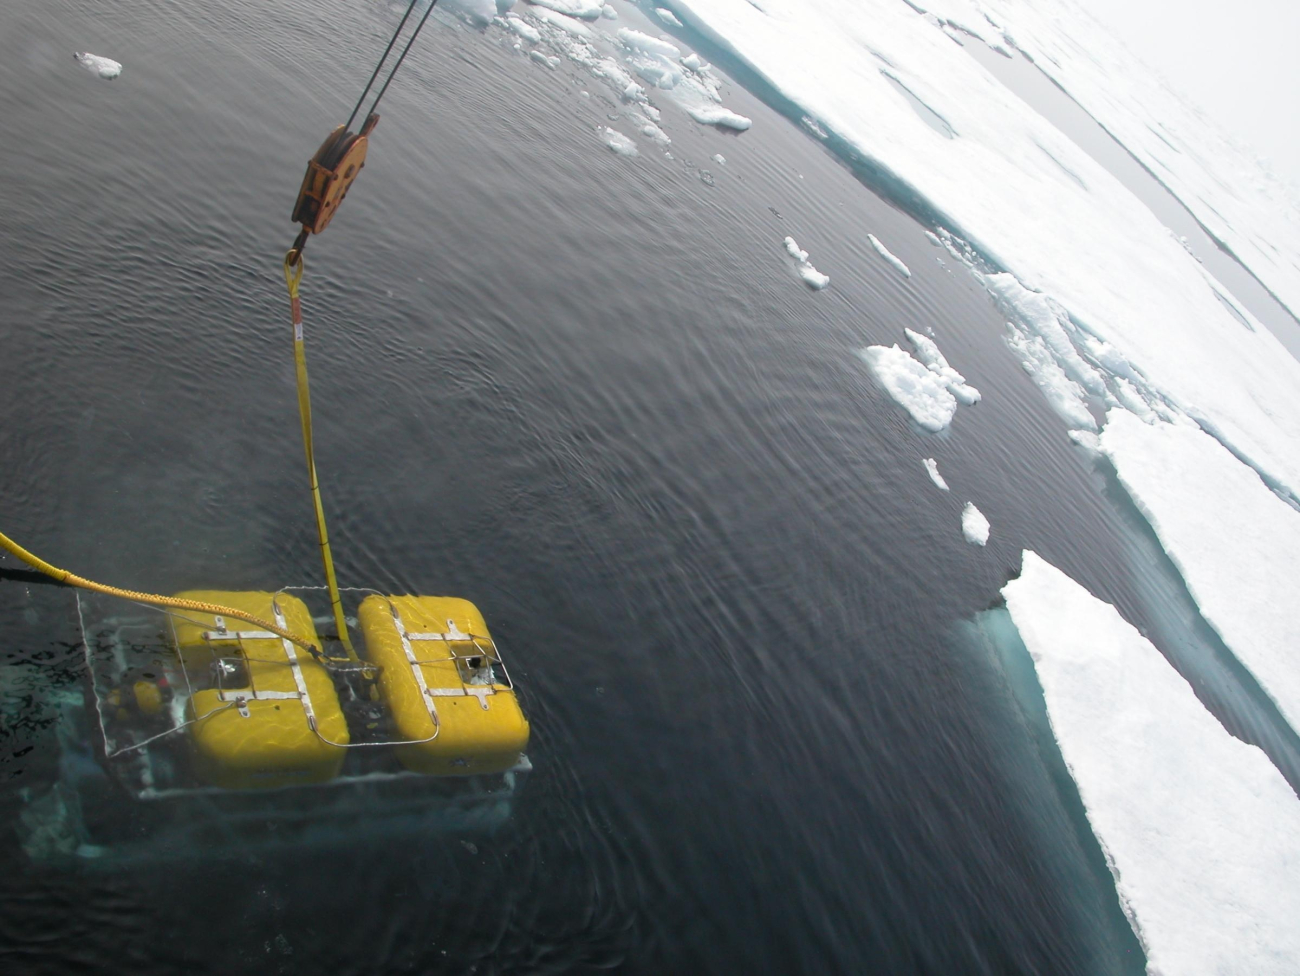 DSSI's Global Explorer ROV descends under icy waters to study marine lifein the Canada Basin, one of the deepest parts of the Arctic Ocean